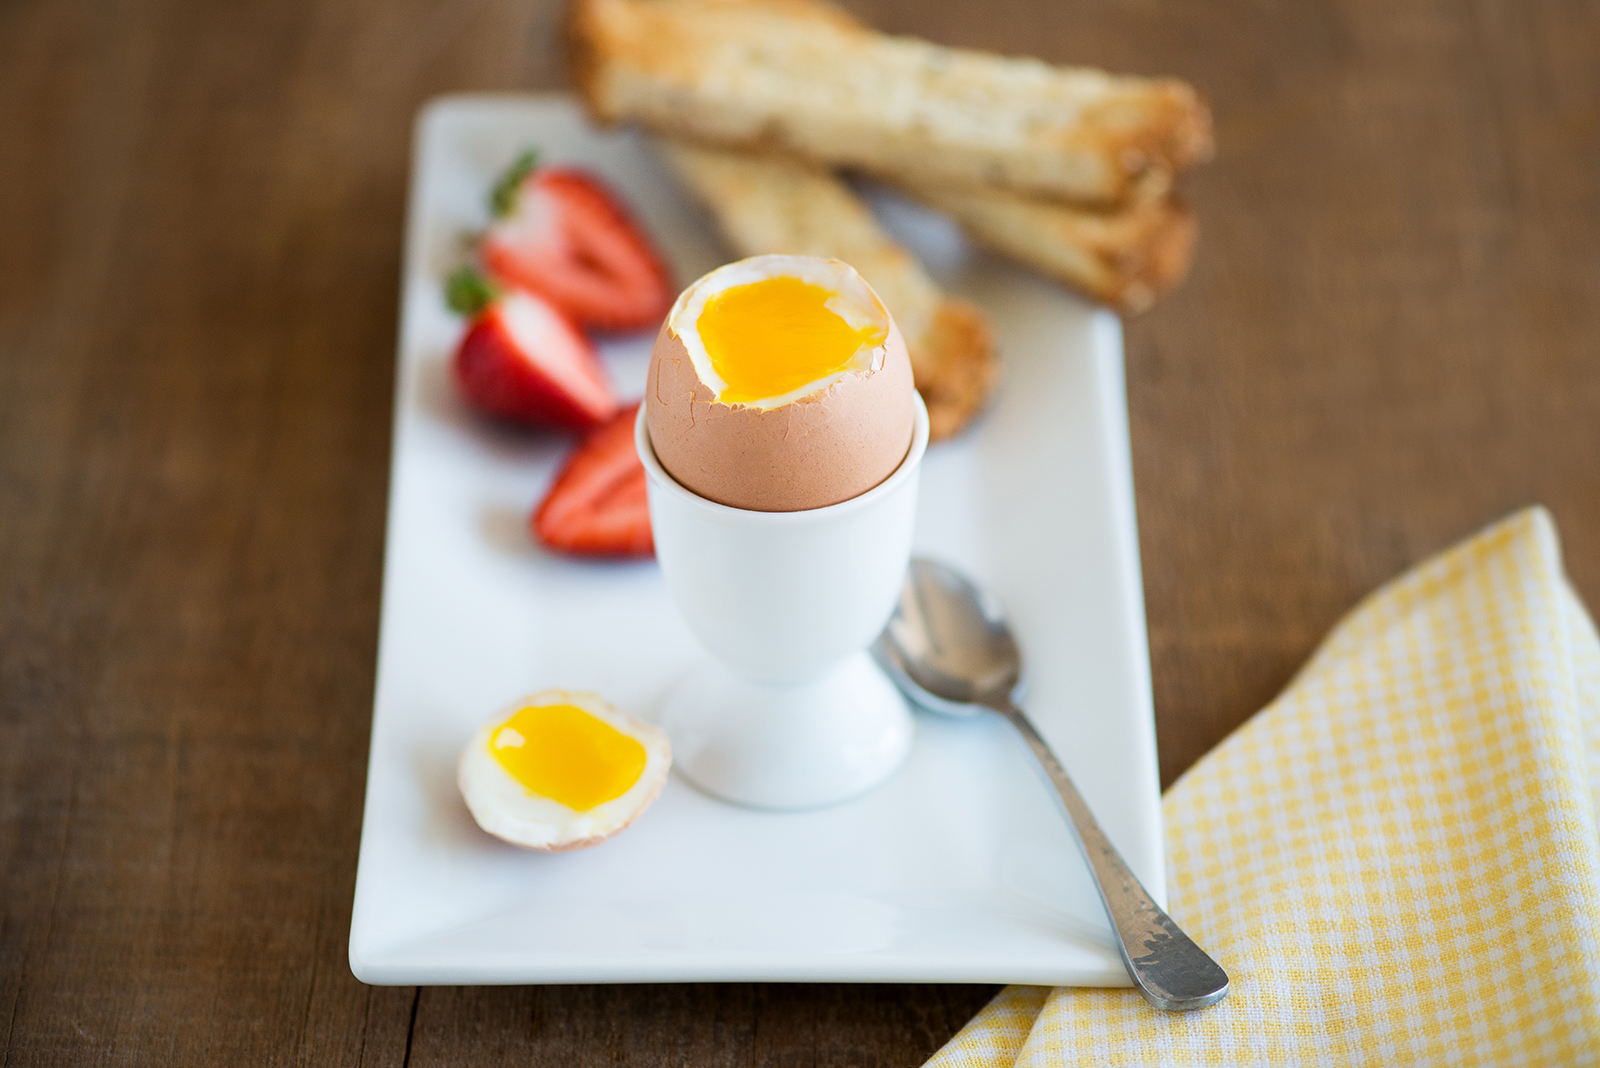 How to Get Perfect Soft-Boiled Eggs Every Time